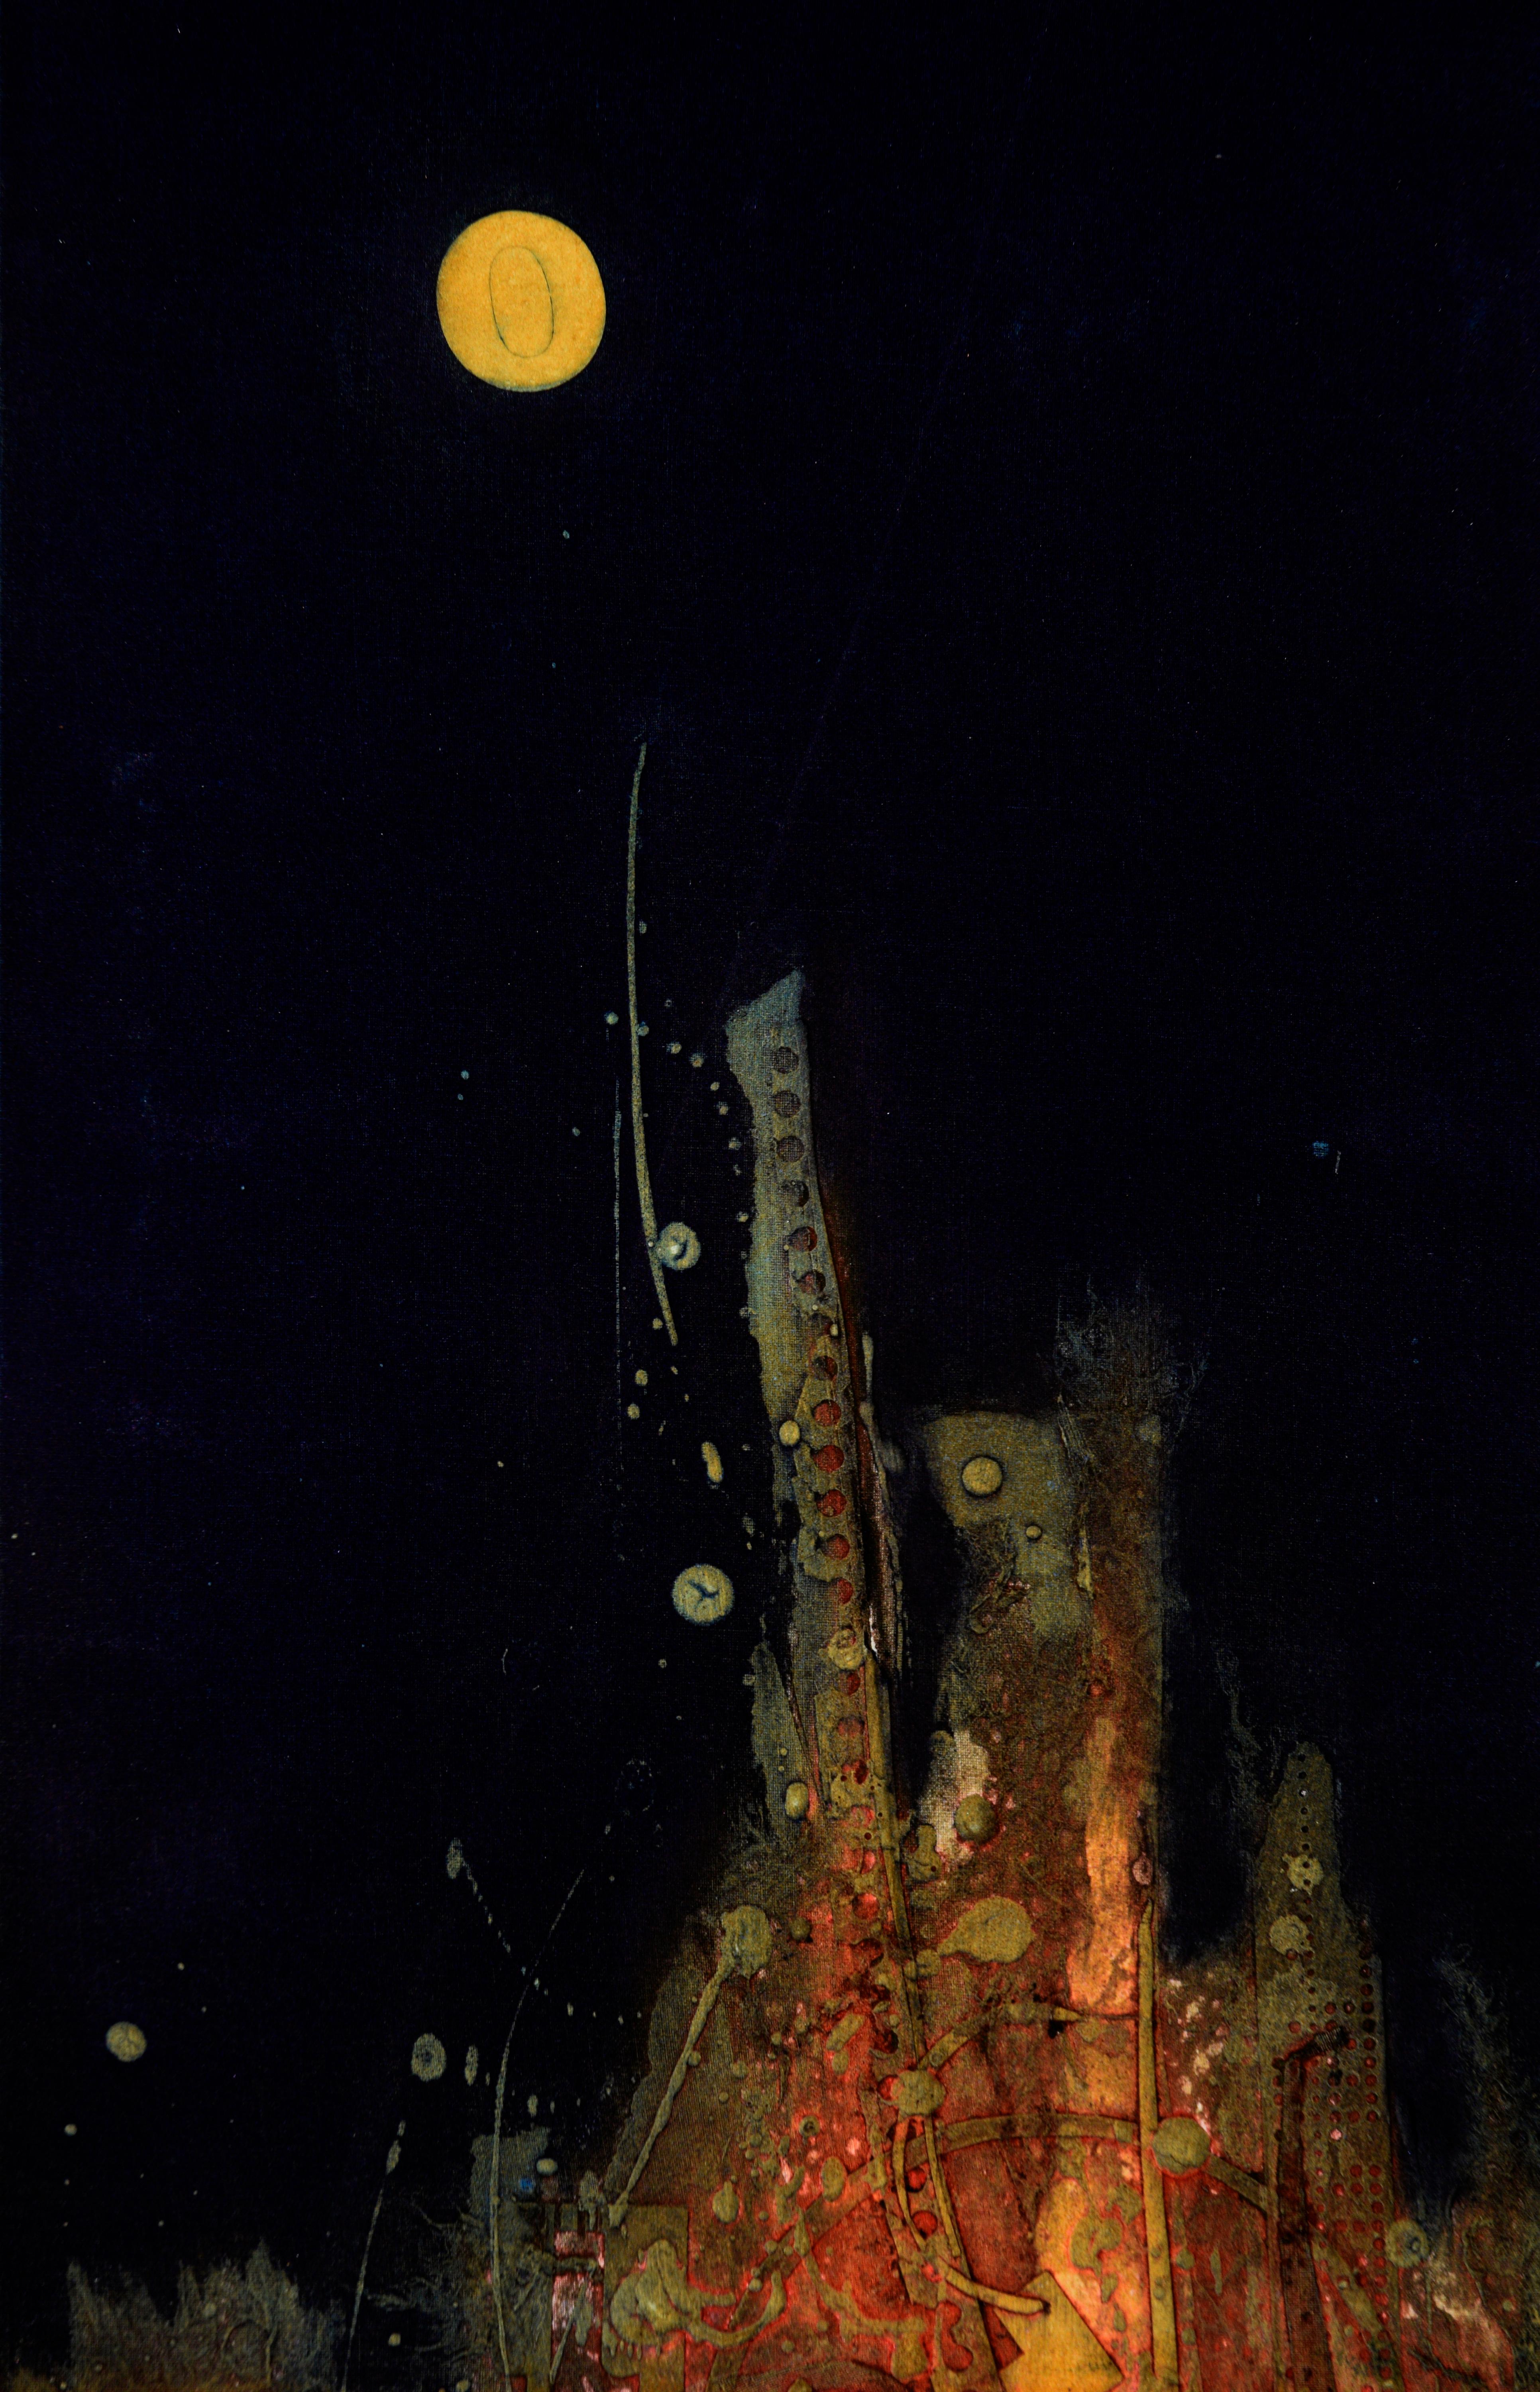 Dramatic and compelling abstract lithograph of an abstracted lava-like form or glowing skyline under a full moon on a pitch black background by Patricia A. Pearce (American, b. 1948). Unsigned and unframed. Purchased as part of the artist's